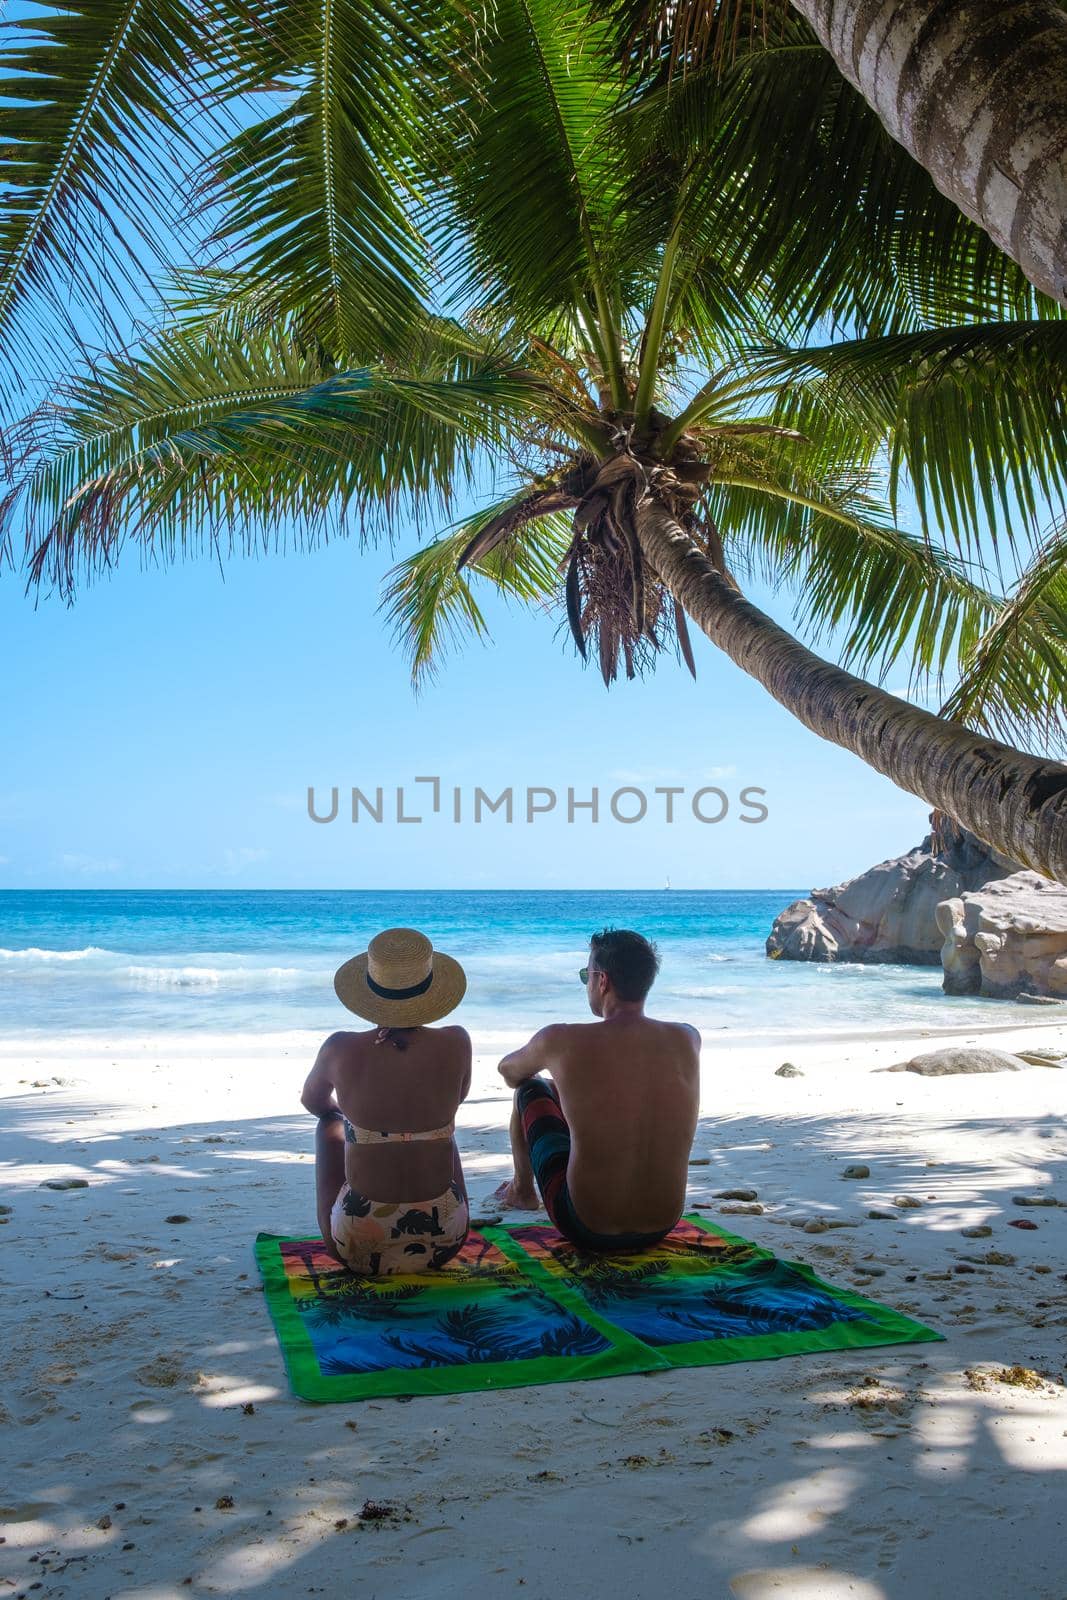 Anse Patates, La Digue Seychelles, a young couple of men and women on a tropical beach during a luxury vacation in Seychelles. Tropical beach Anse Patates, La Digue Seychelles